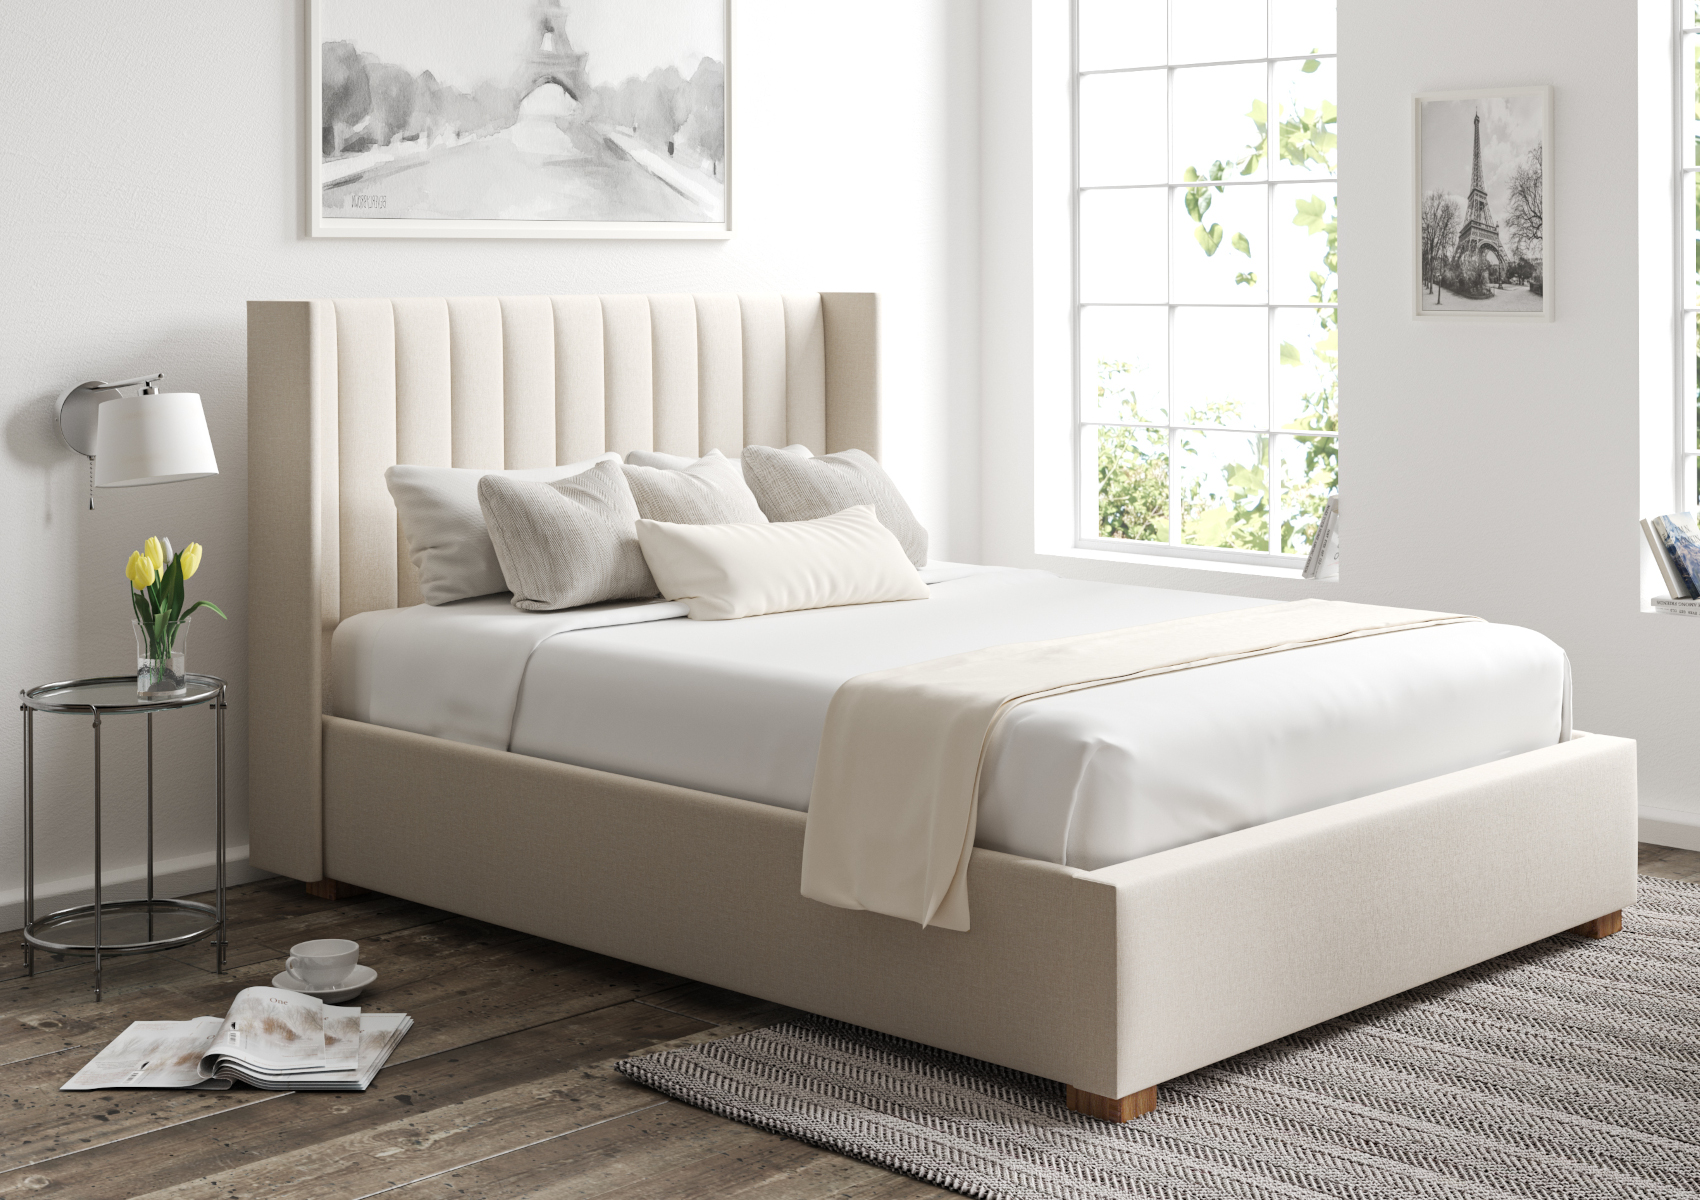 View Essentials Winged Off White Ottoman Bed Frame Time4Sleep information